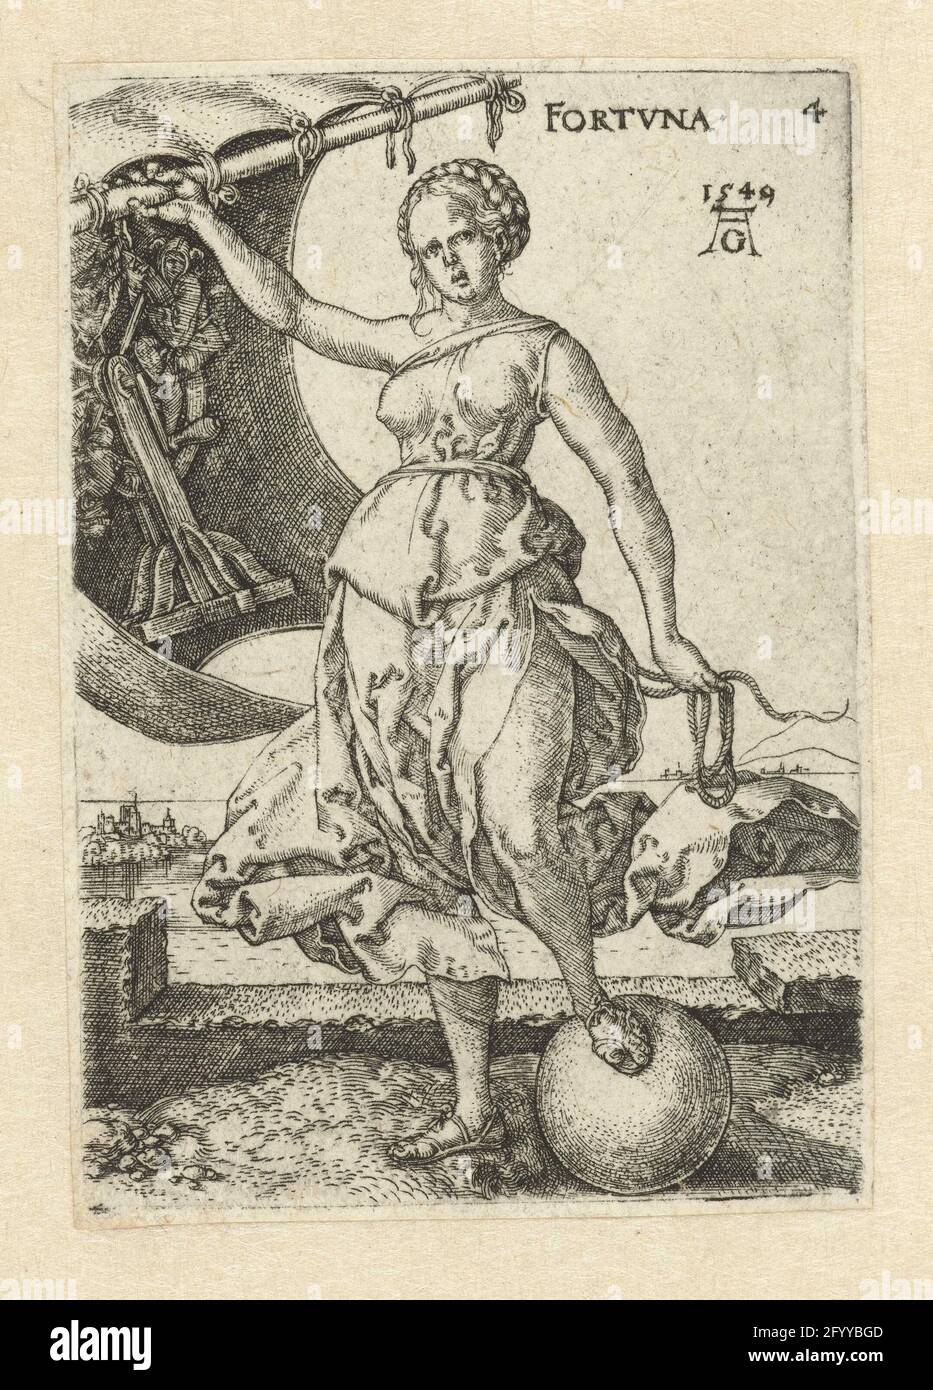 Fortune; Fortuna; Virtues and vices. Personification from Fortune (Fortuna). A woman standing with one foot on a ball, a sail in her right hand with the wheel of fortune on it. Fourded from a series of fourteen with personnifications of virtues and vices. Stock Photo